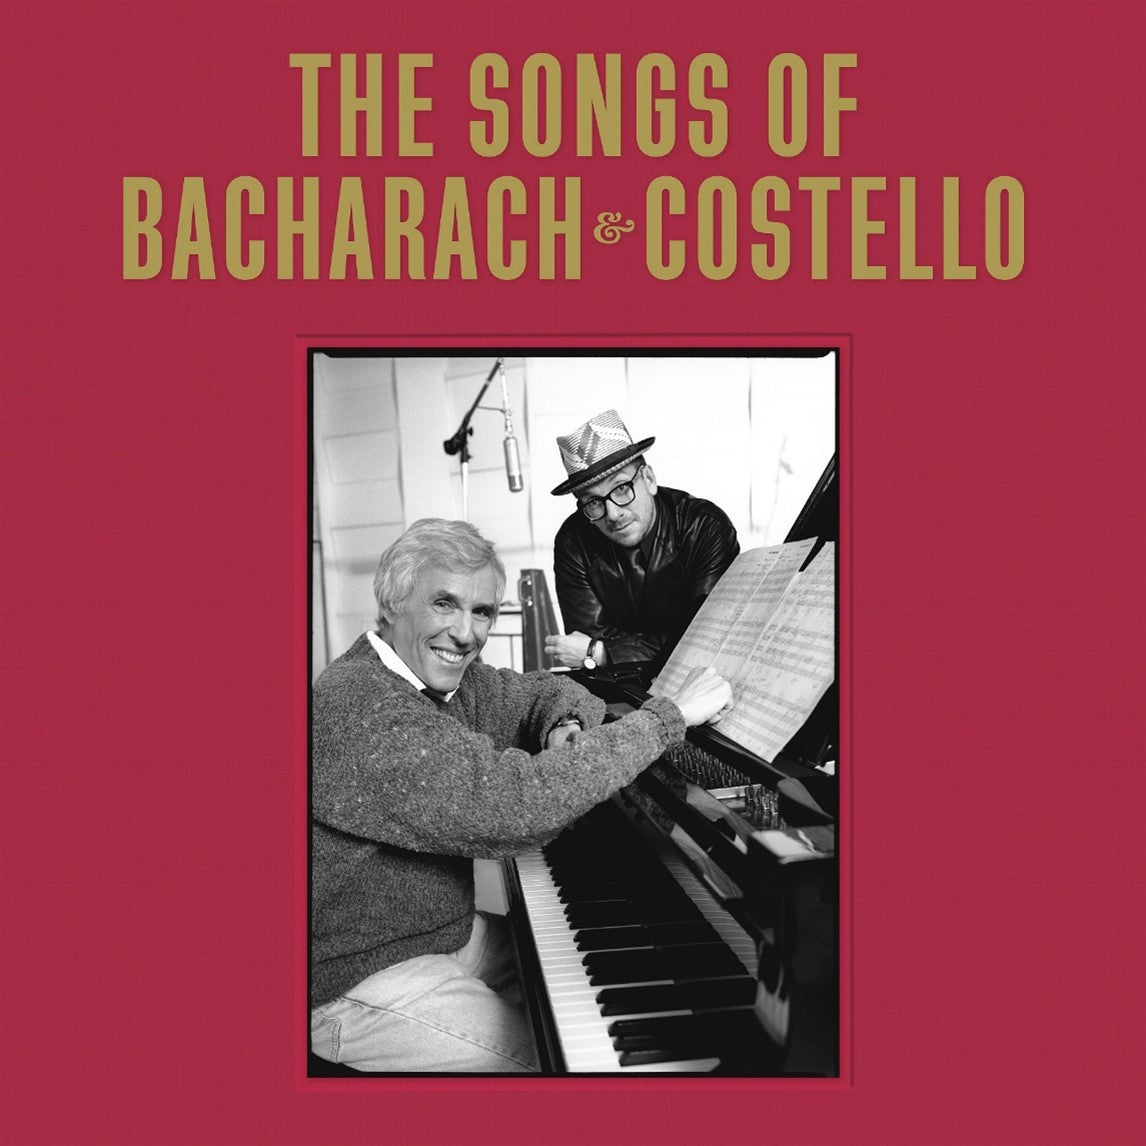 Elvis Costello with Burt Bacharach - The Songs Of Bacharach & Costello